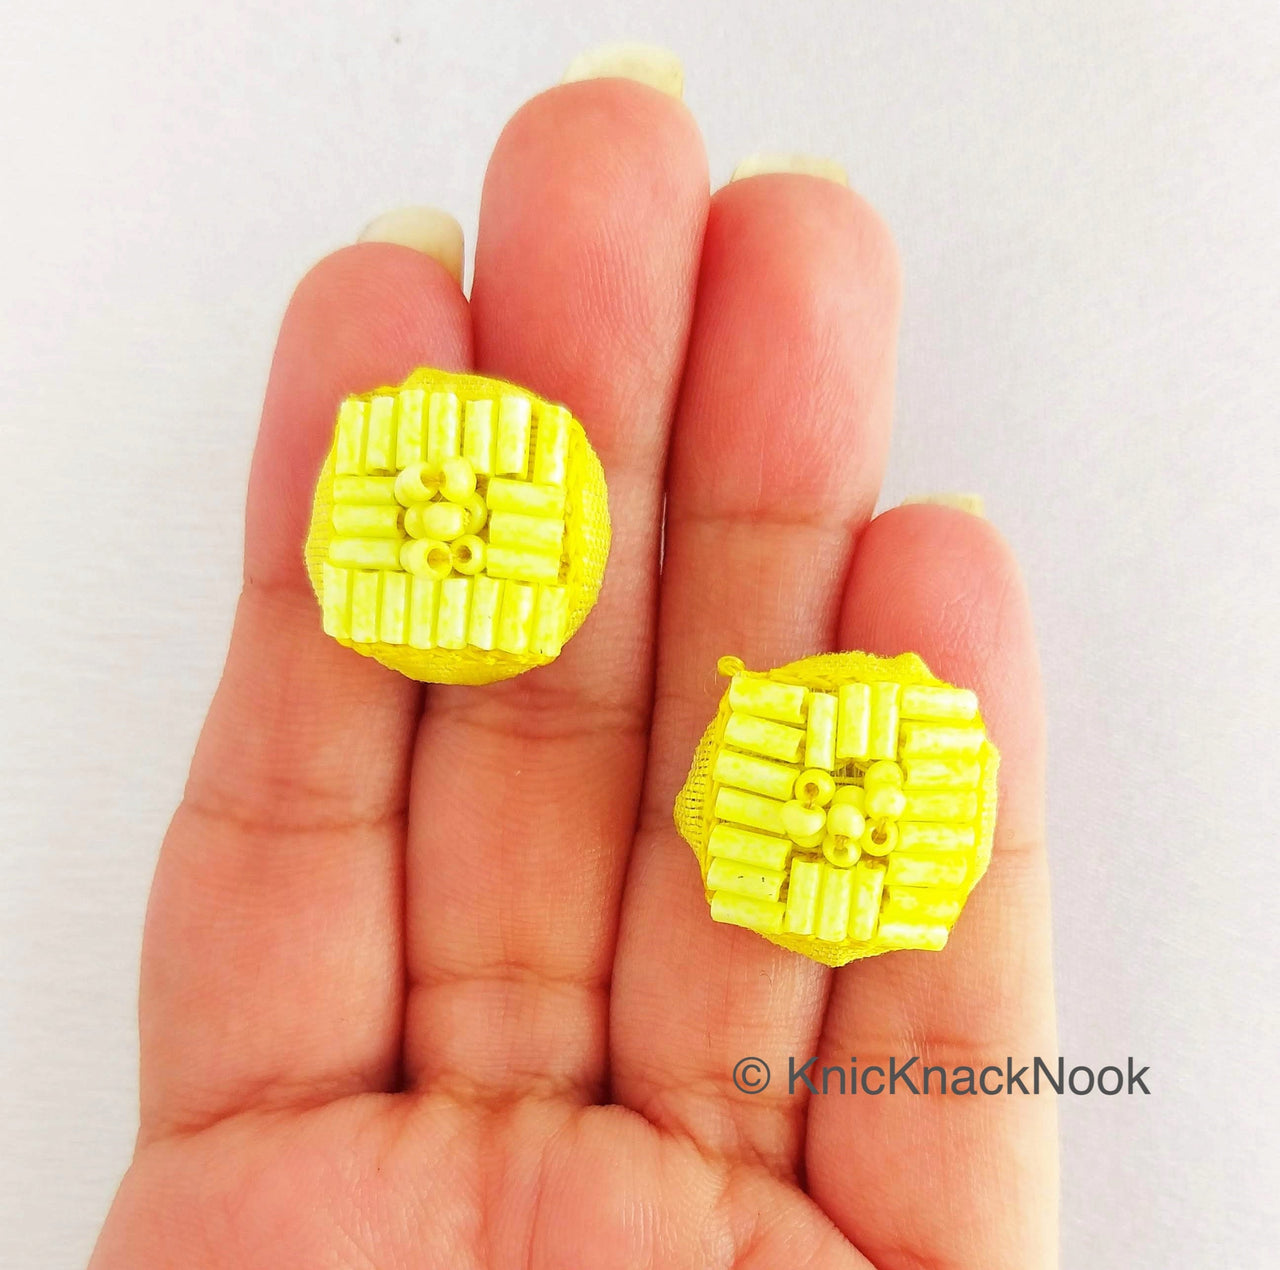 Hand Embroidered Designer Yellow Buttons